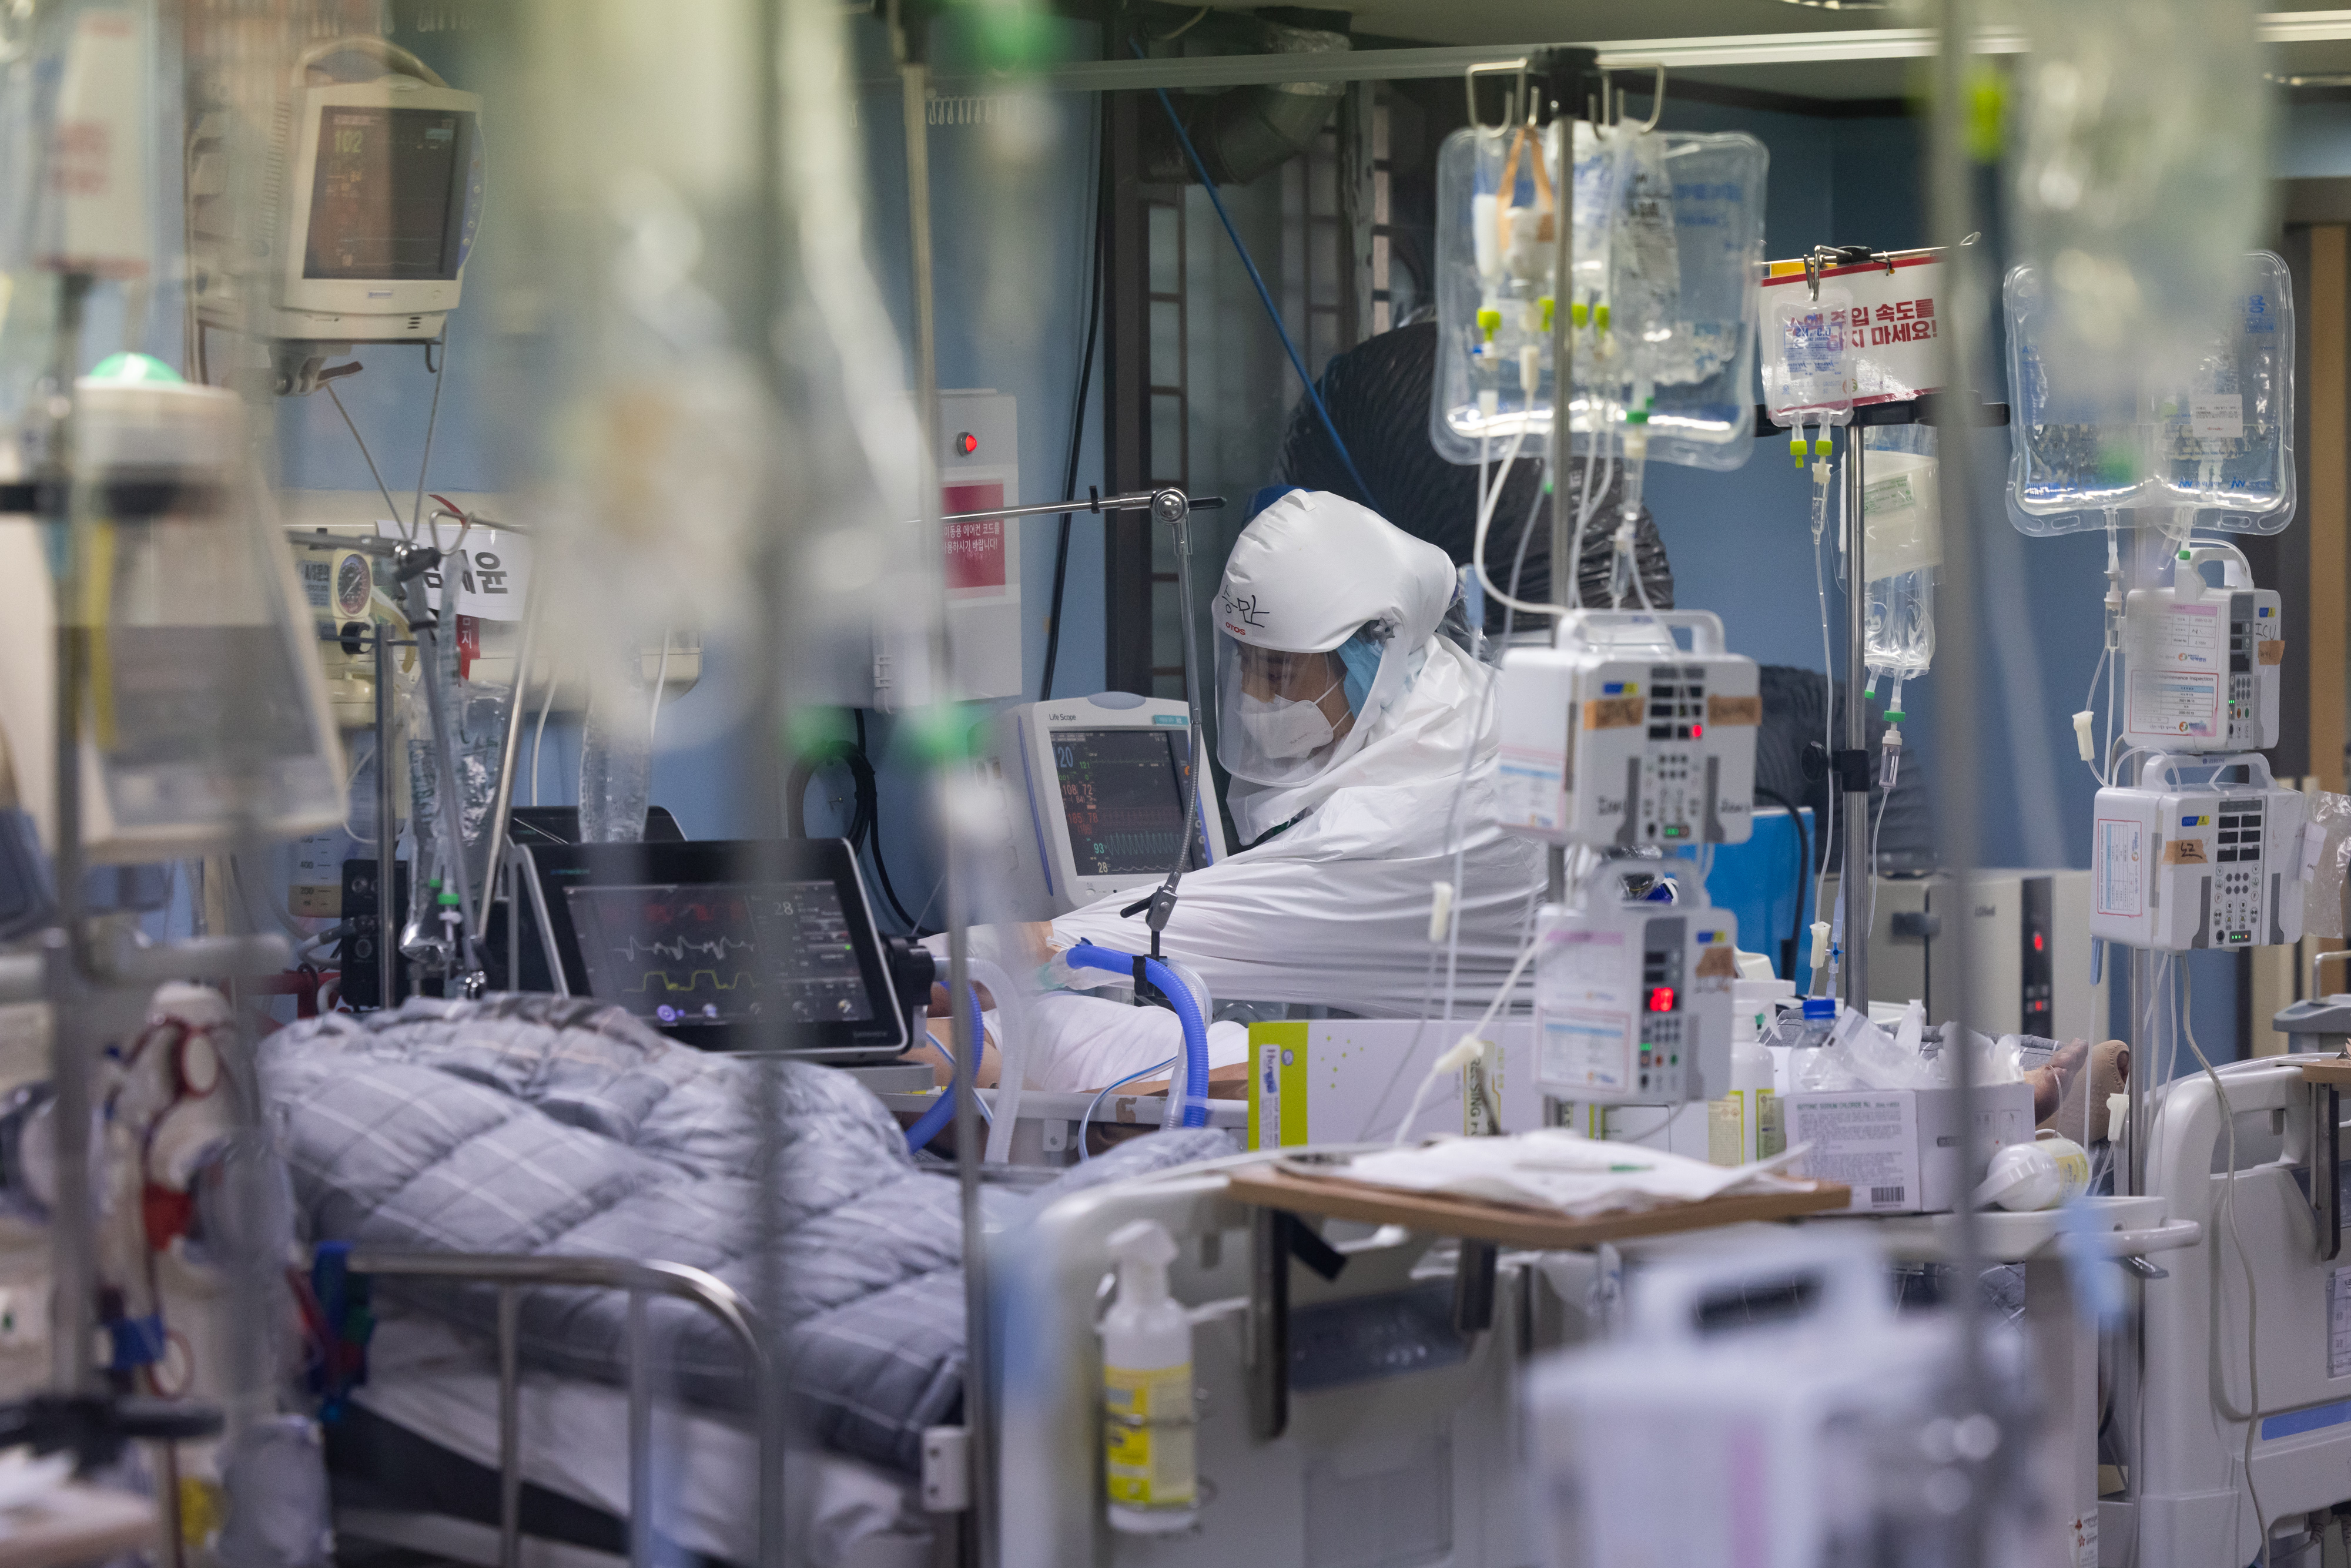 A healthcare worker attends to a Covid-19 patient at an intensive care unit (ICU) at Pyeongtaek Bagae Hospital in Pyeongtaek, Gyeonggi Province, South Korea, on Thursday, Dec. 16, 2021. 